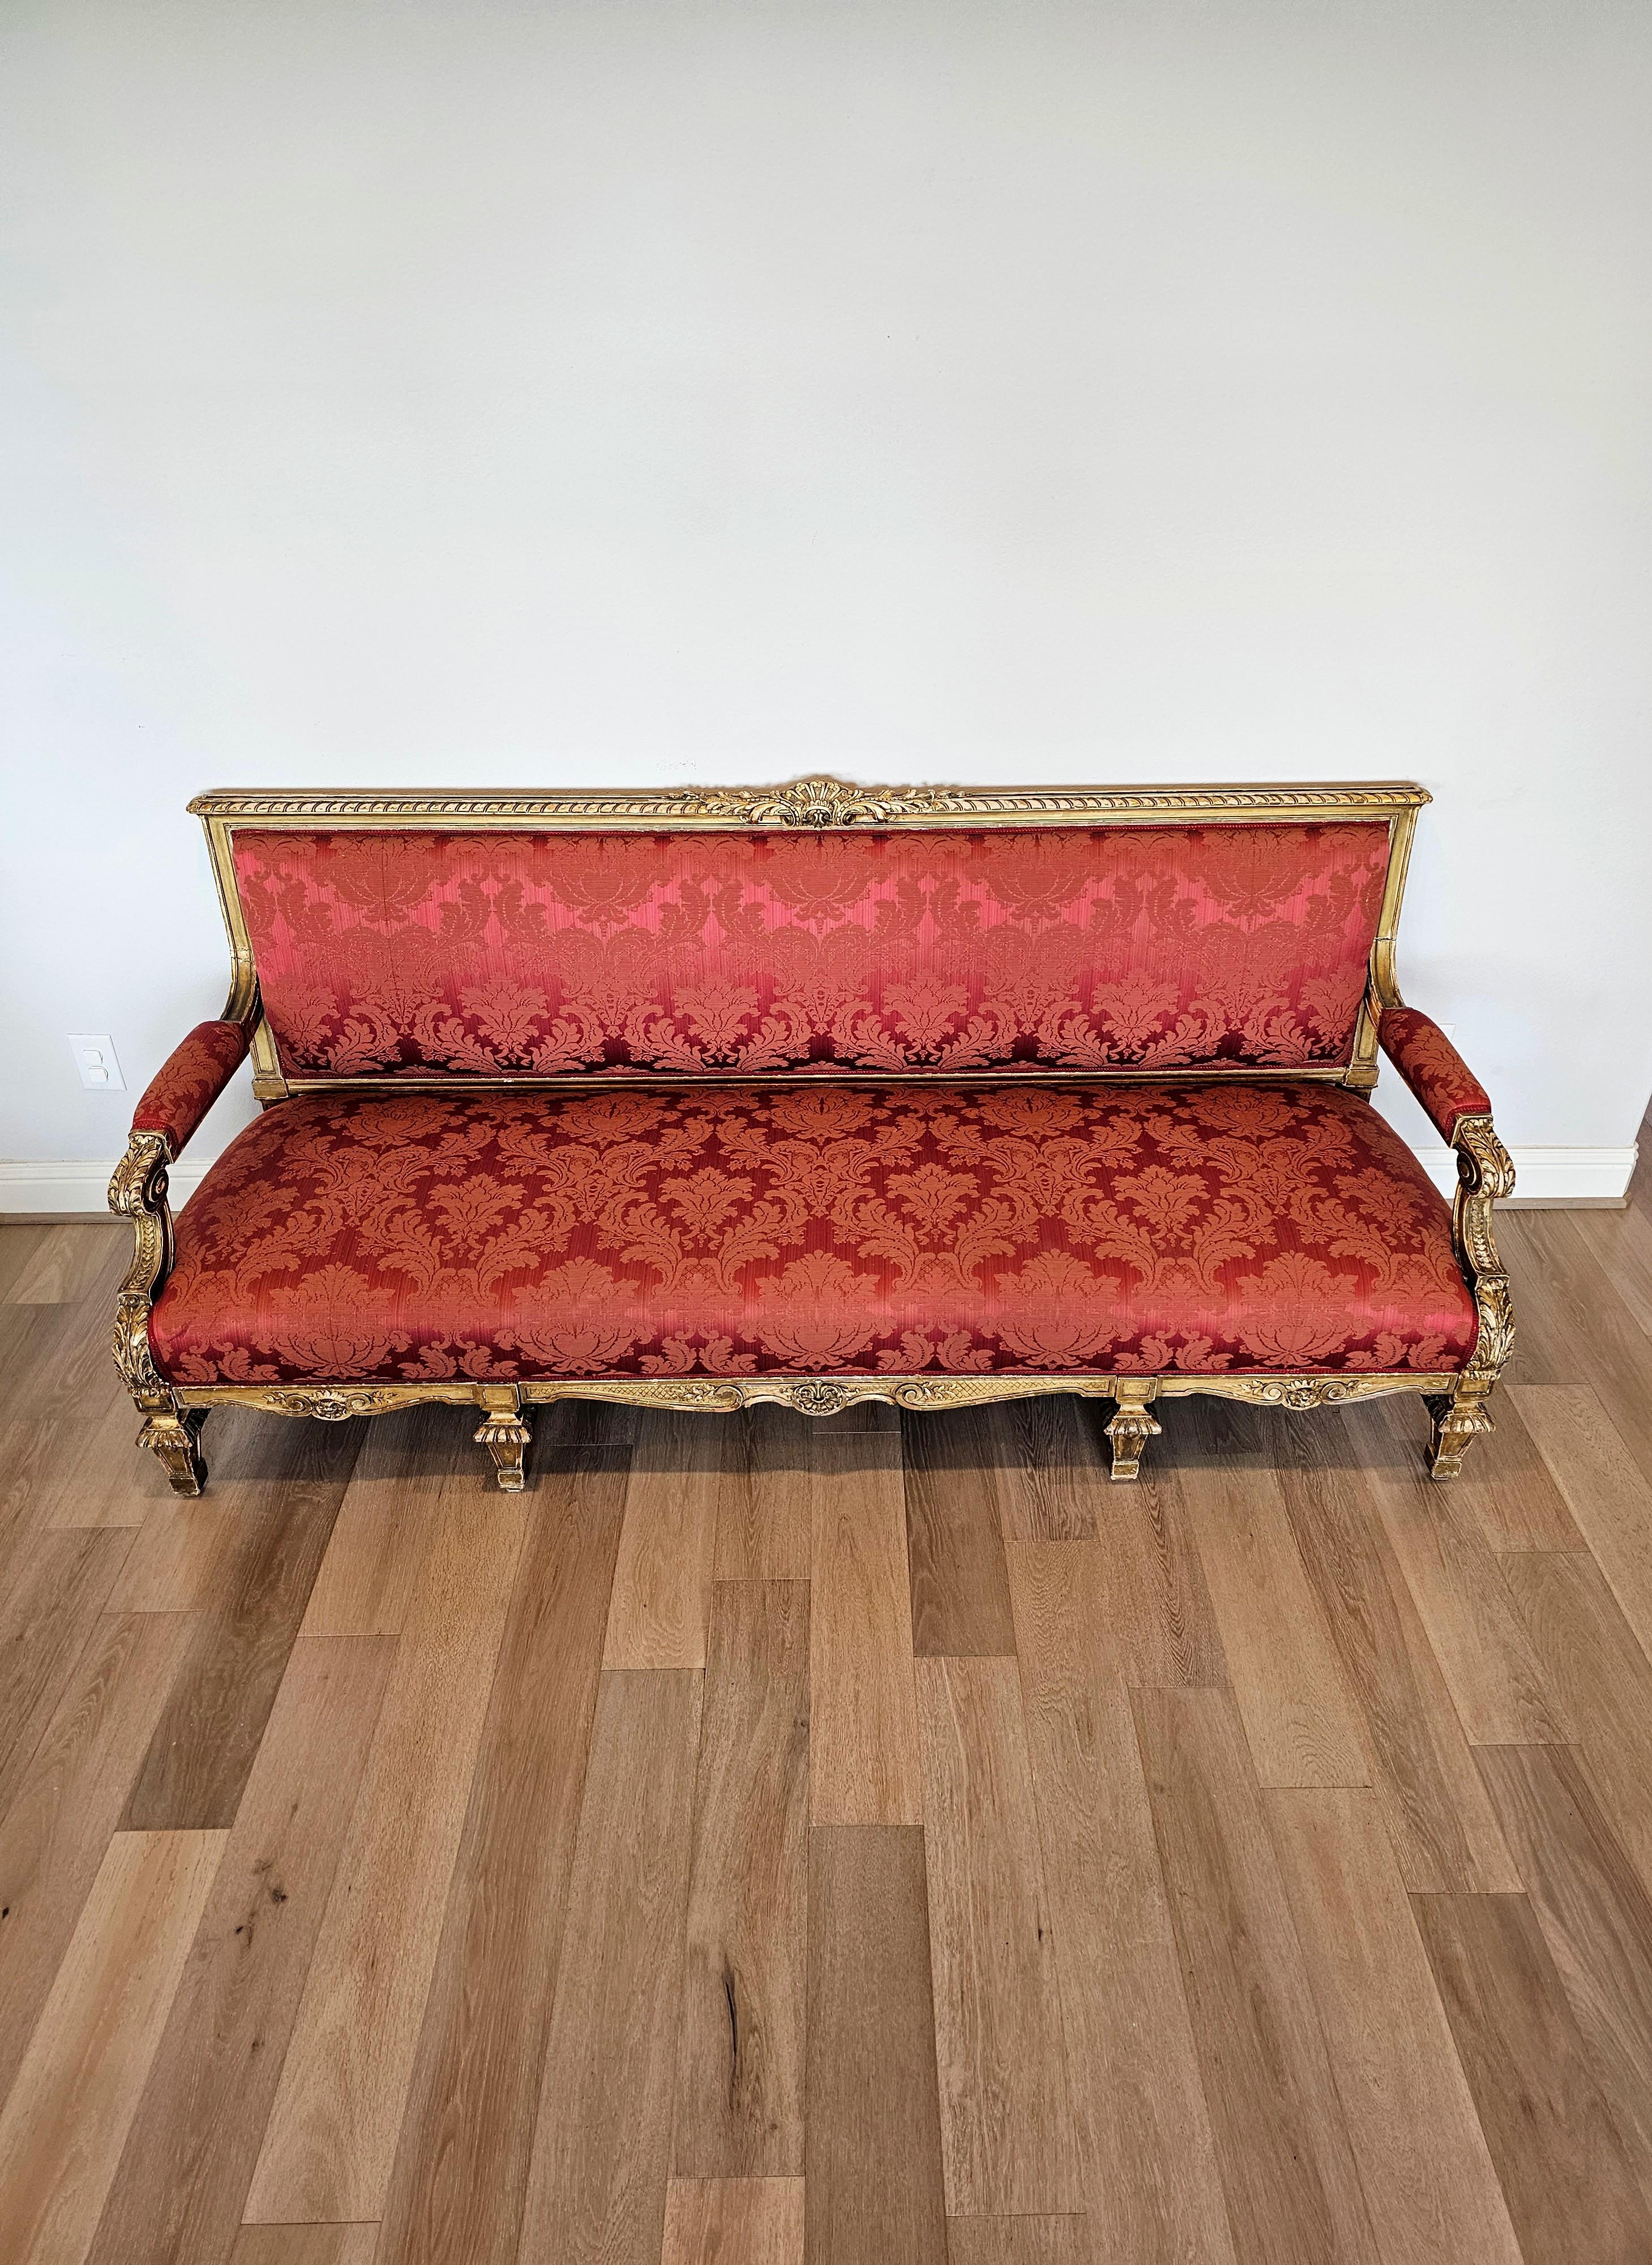 Hand-Carved Antique French Louis XVI Style Giltwood Damask Upholstered Long Sofa Set For Sale